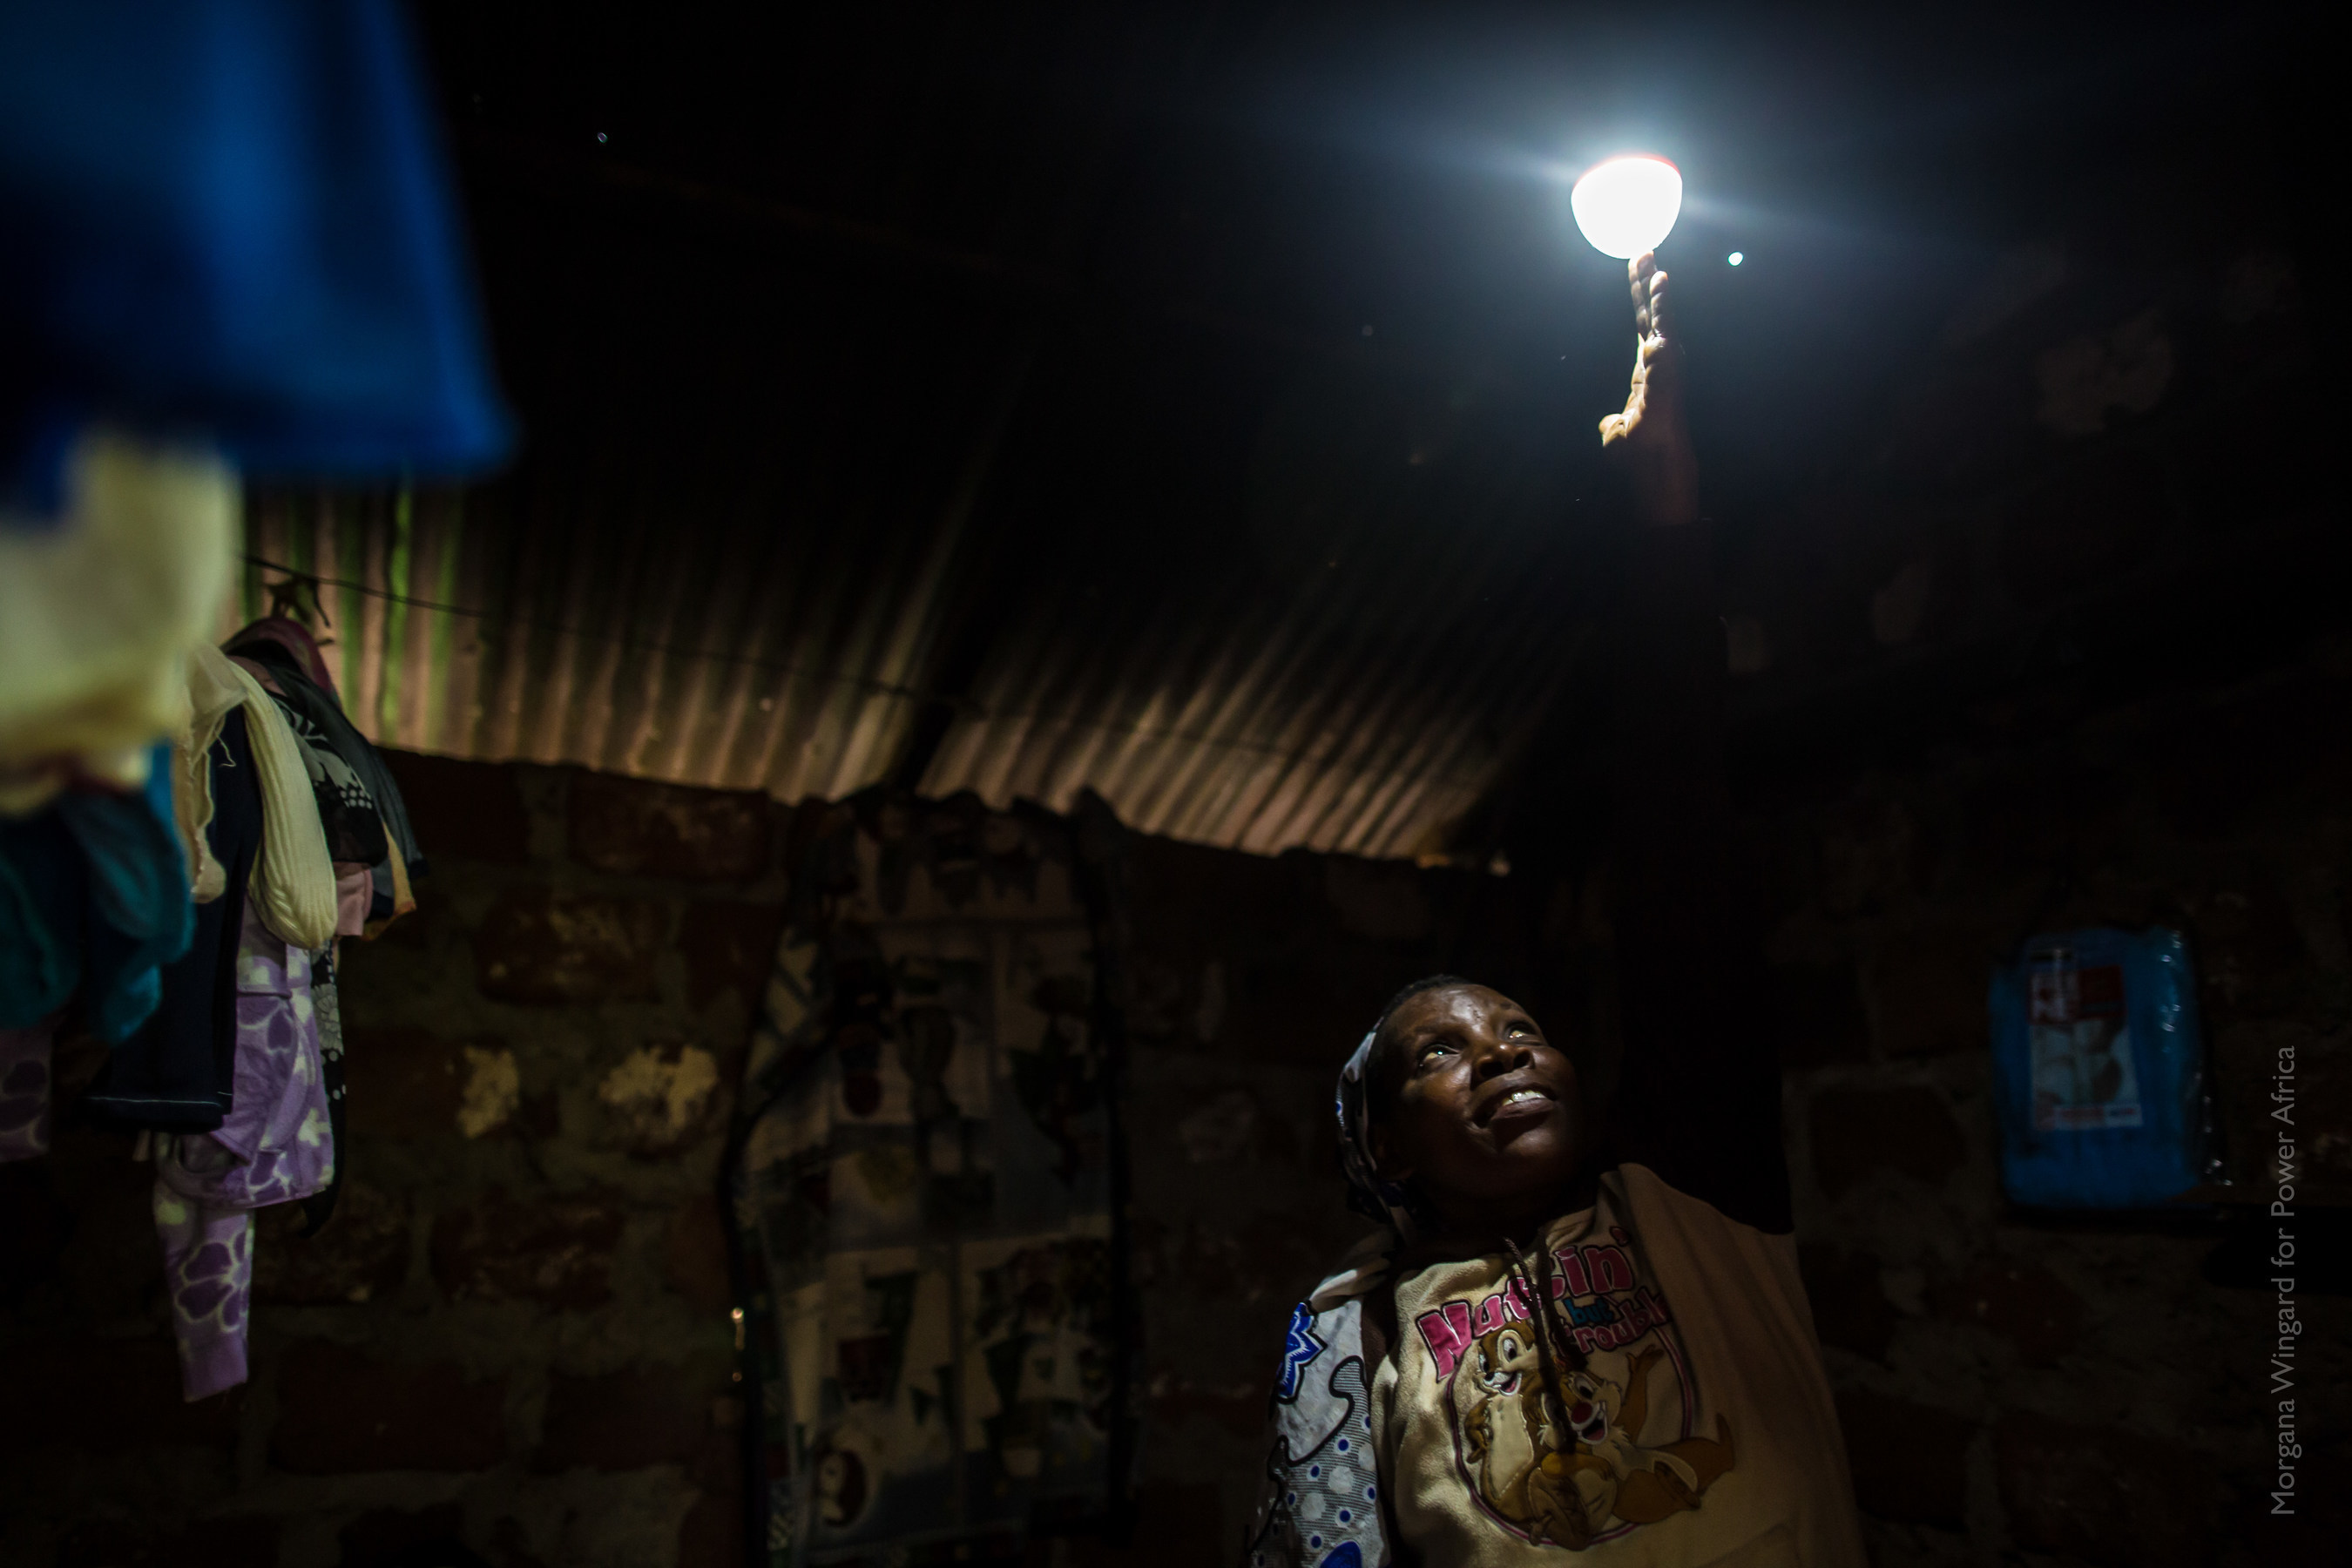 d.light expands its own PayGo financing service to partners around the world to increase energy options to the 2.3 billion people living without access to reliable power.